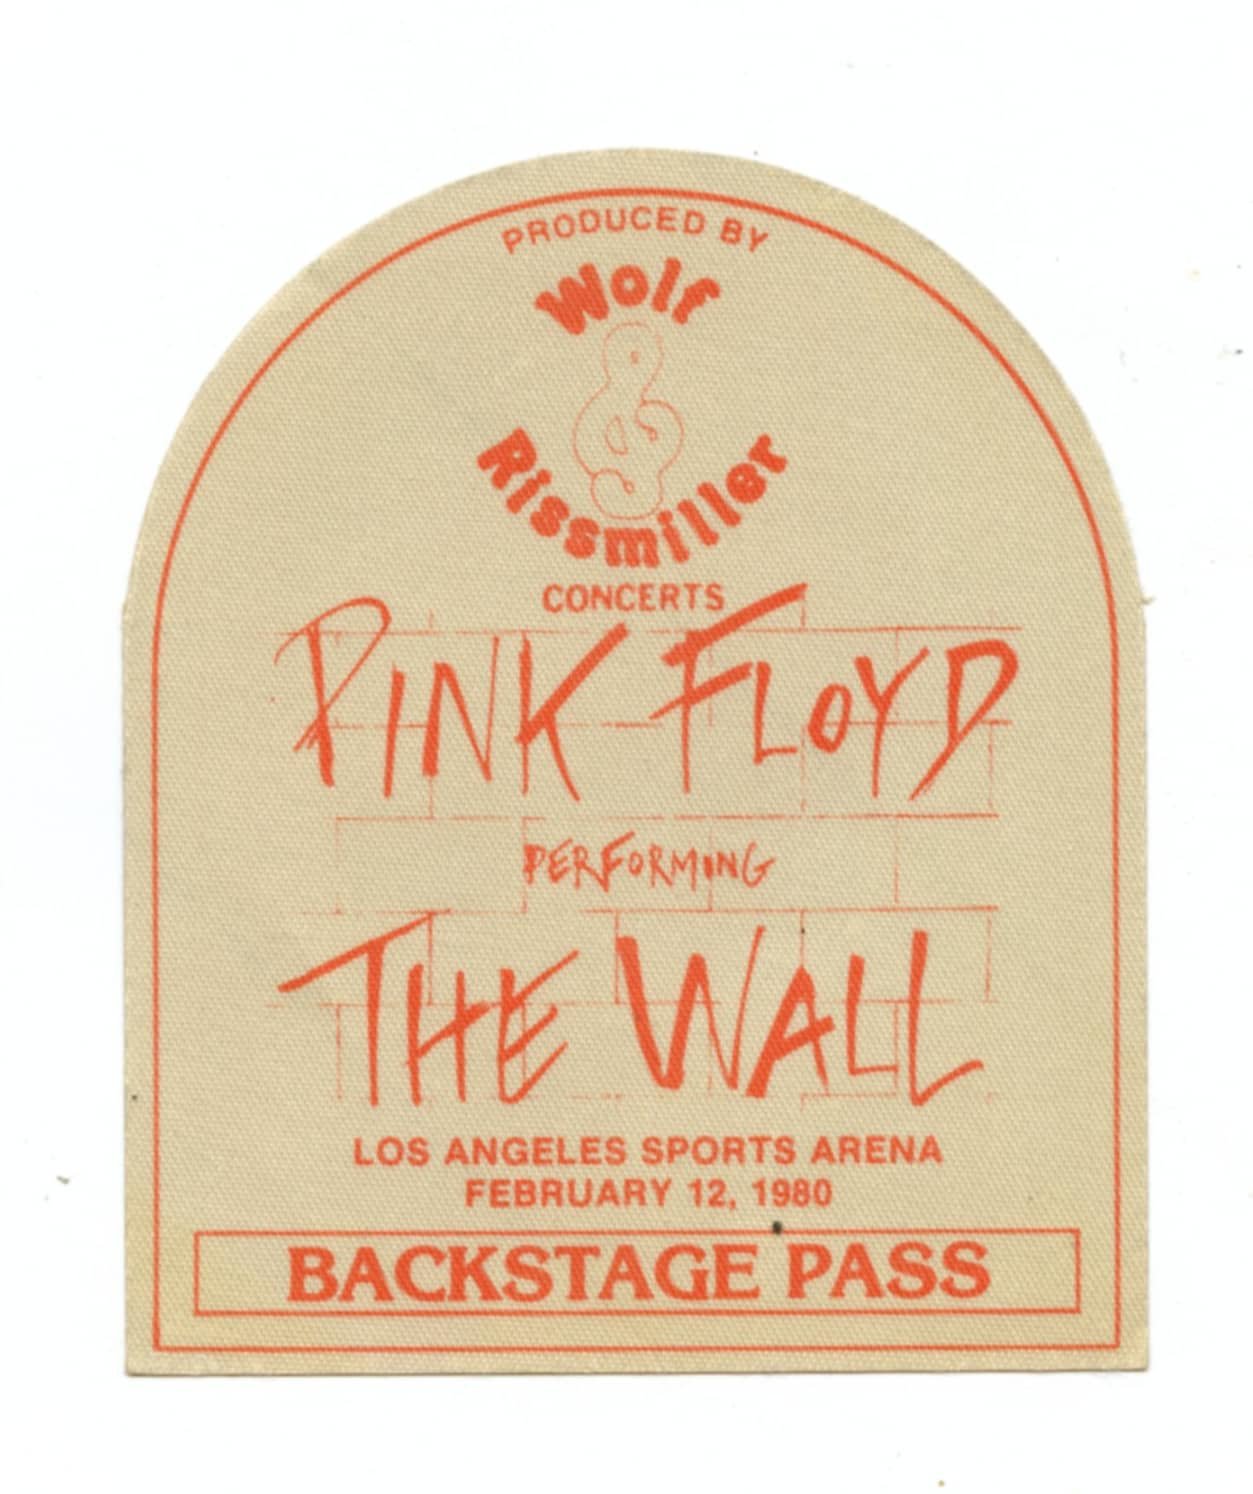 Pink Floyd Backstage Pass 1980 Feb 12 Los Angeles Sports Arena The Wall Tour